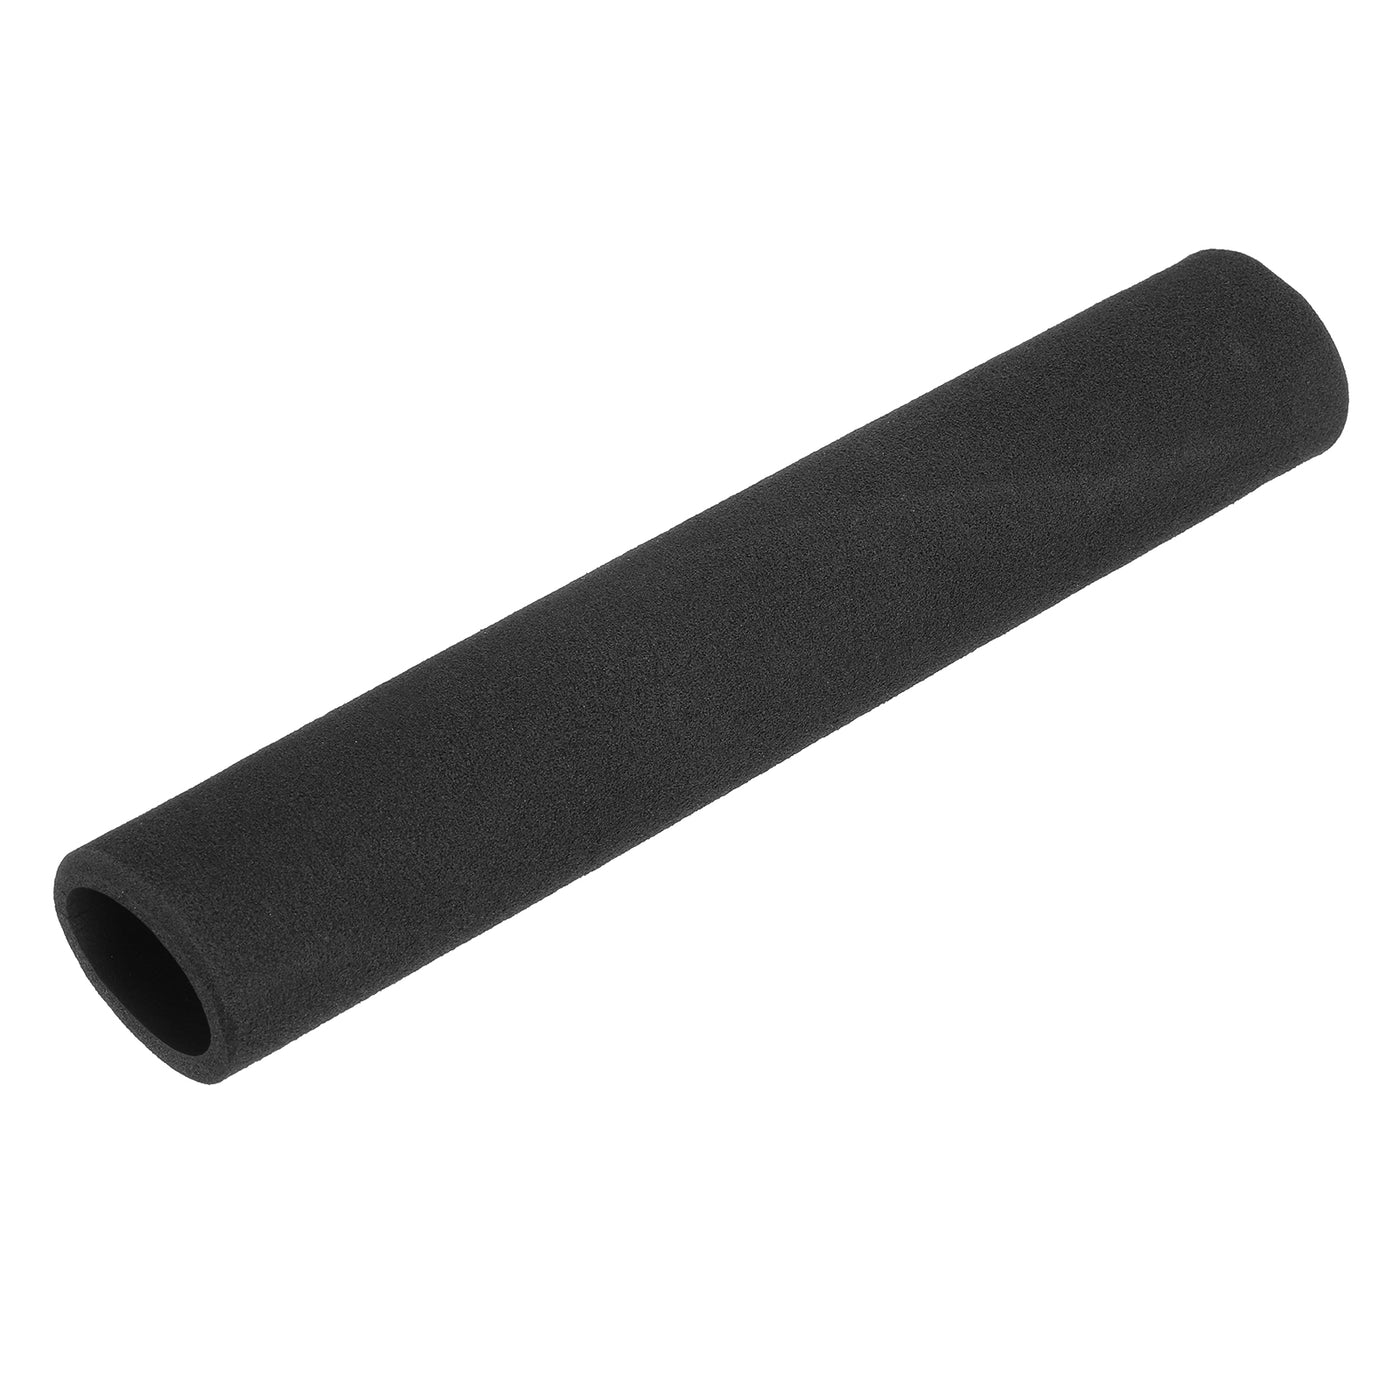 uxcell Uxcell Pipe Insulation Tube Foam Tubing for Handle Grip Support 27mm ID 37mm OD 195mm Heat Preservation Black